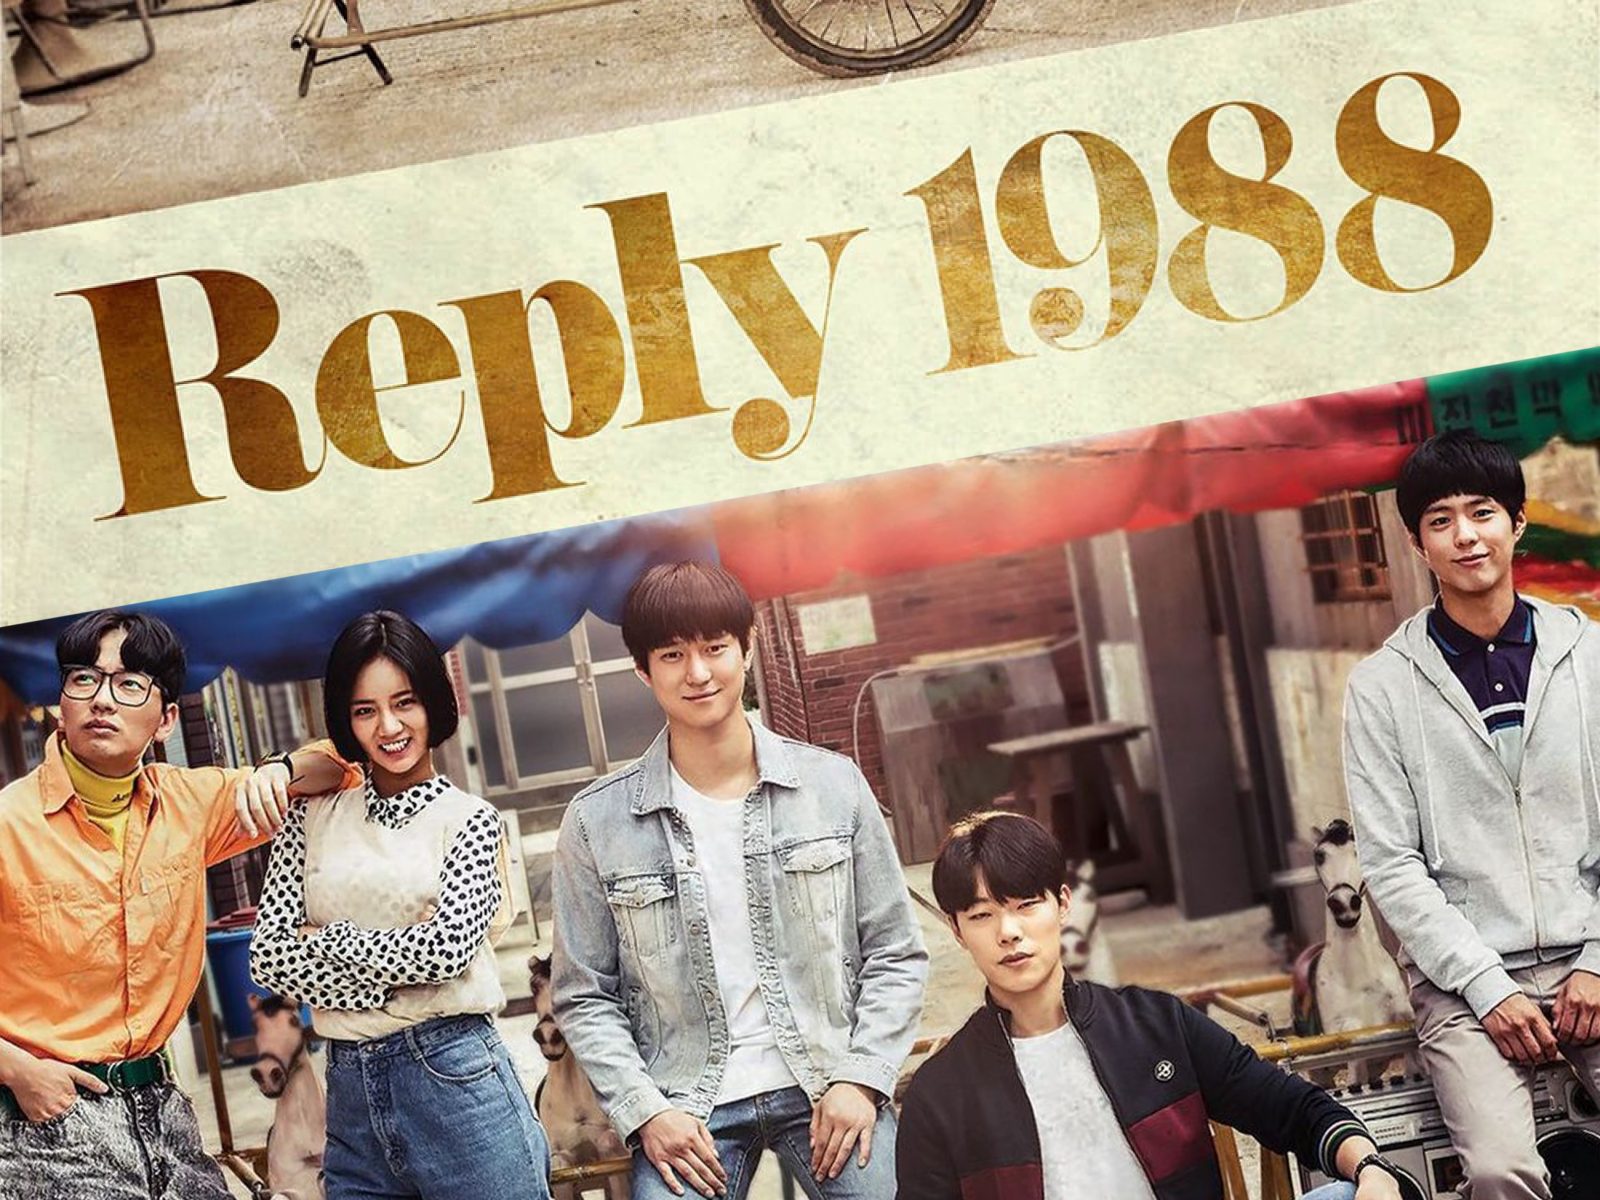 Open-WEB-The-Review-reply1988